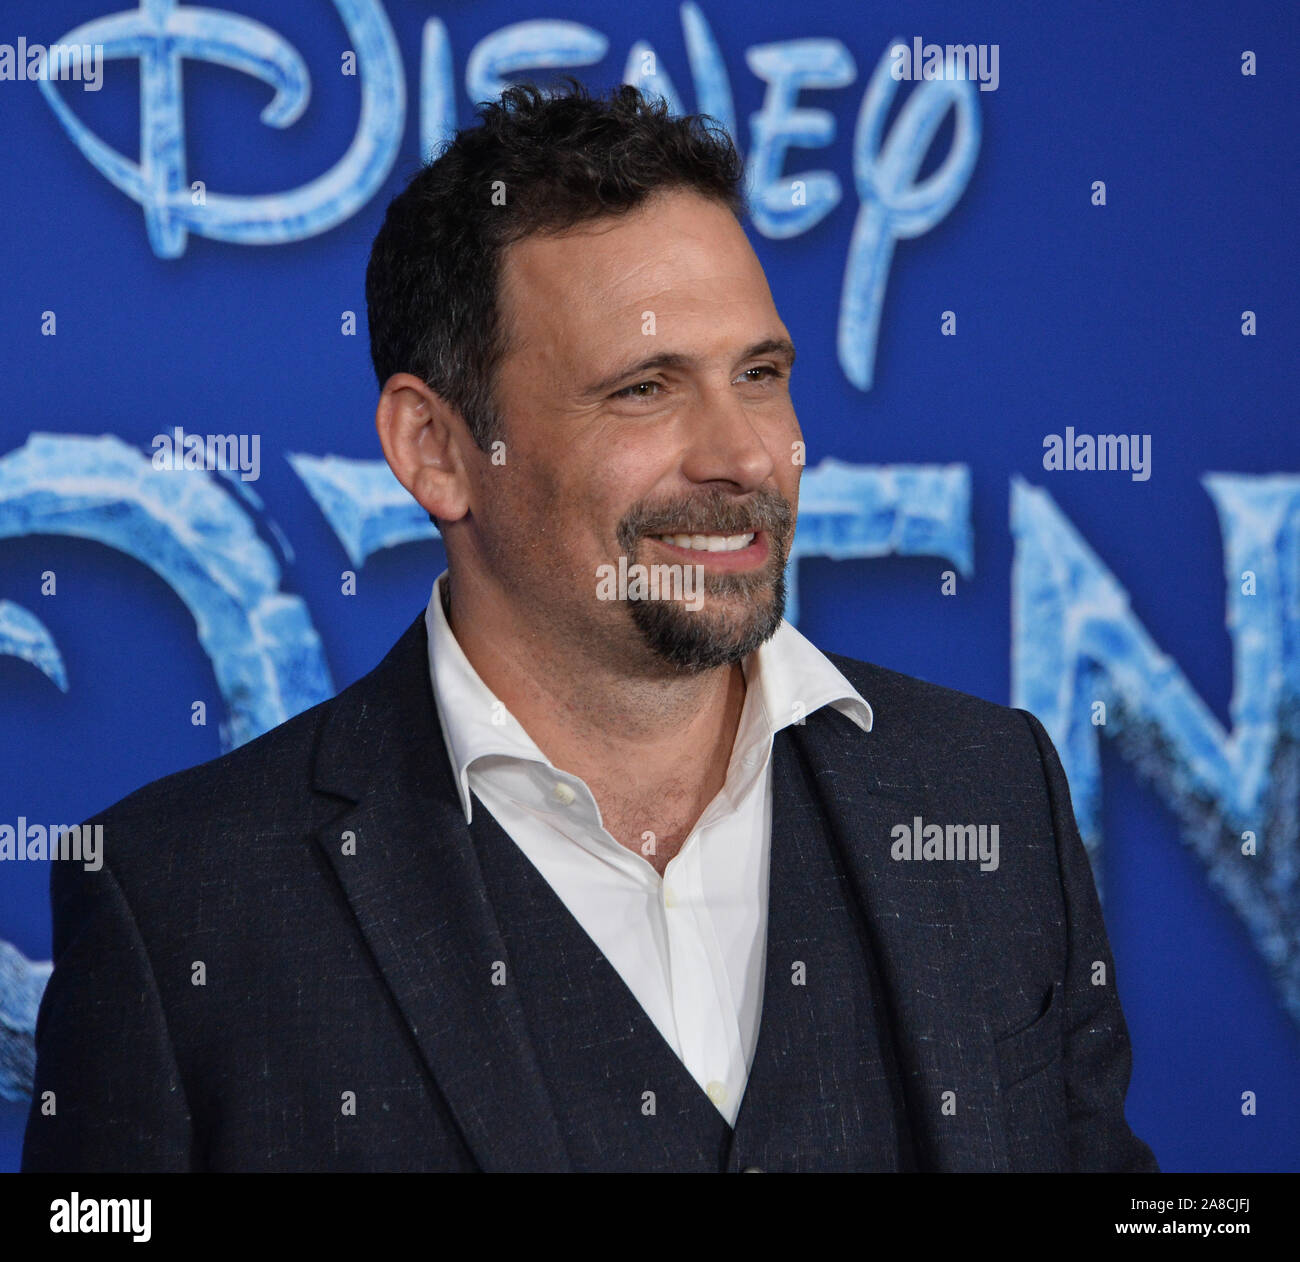 Los Angeles, United States. 07th Nov, 2019. Cast member Jeremy Sisto attends the premiere of the animated musical comedy 'Frozen II' premiere at the Dolby Theatre in the Hollywood section of Los Angeles on Thursday, November 7, 2019. Storyline: Anna, Elsa, Kristoff, Olaf and Sven leave Arendelle to travel to an ancient, autumn-bound forest of an enchanted land. They set out to find the origin of Elsa's powers in order to save their kingdom. Photo by Jim Ruymen/UPI Credit: UPI/Alamy Live News Stock Photo